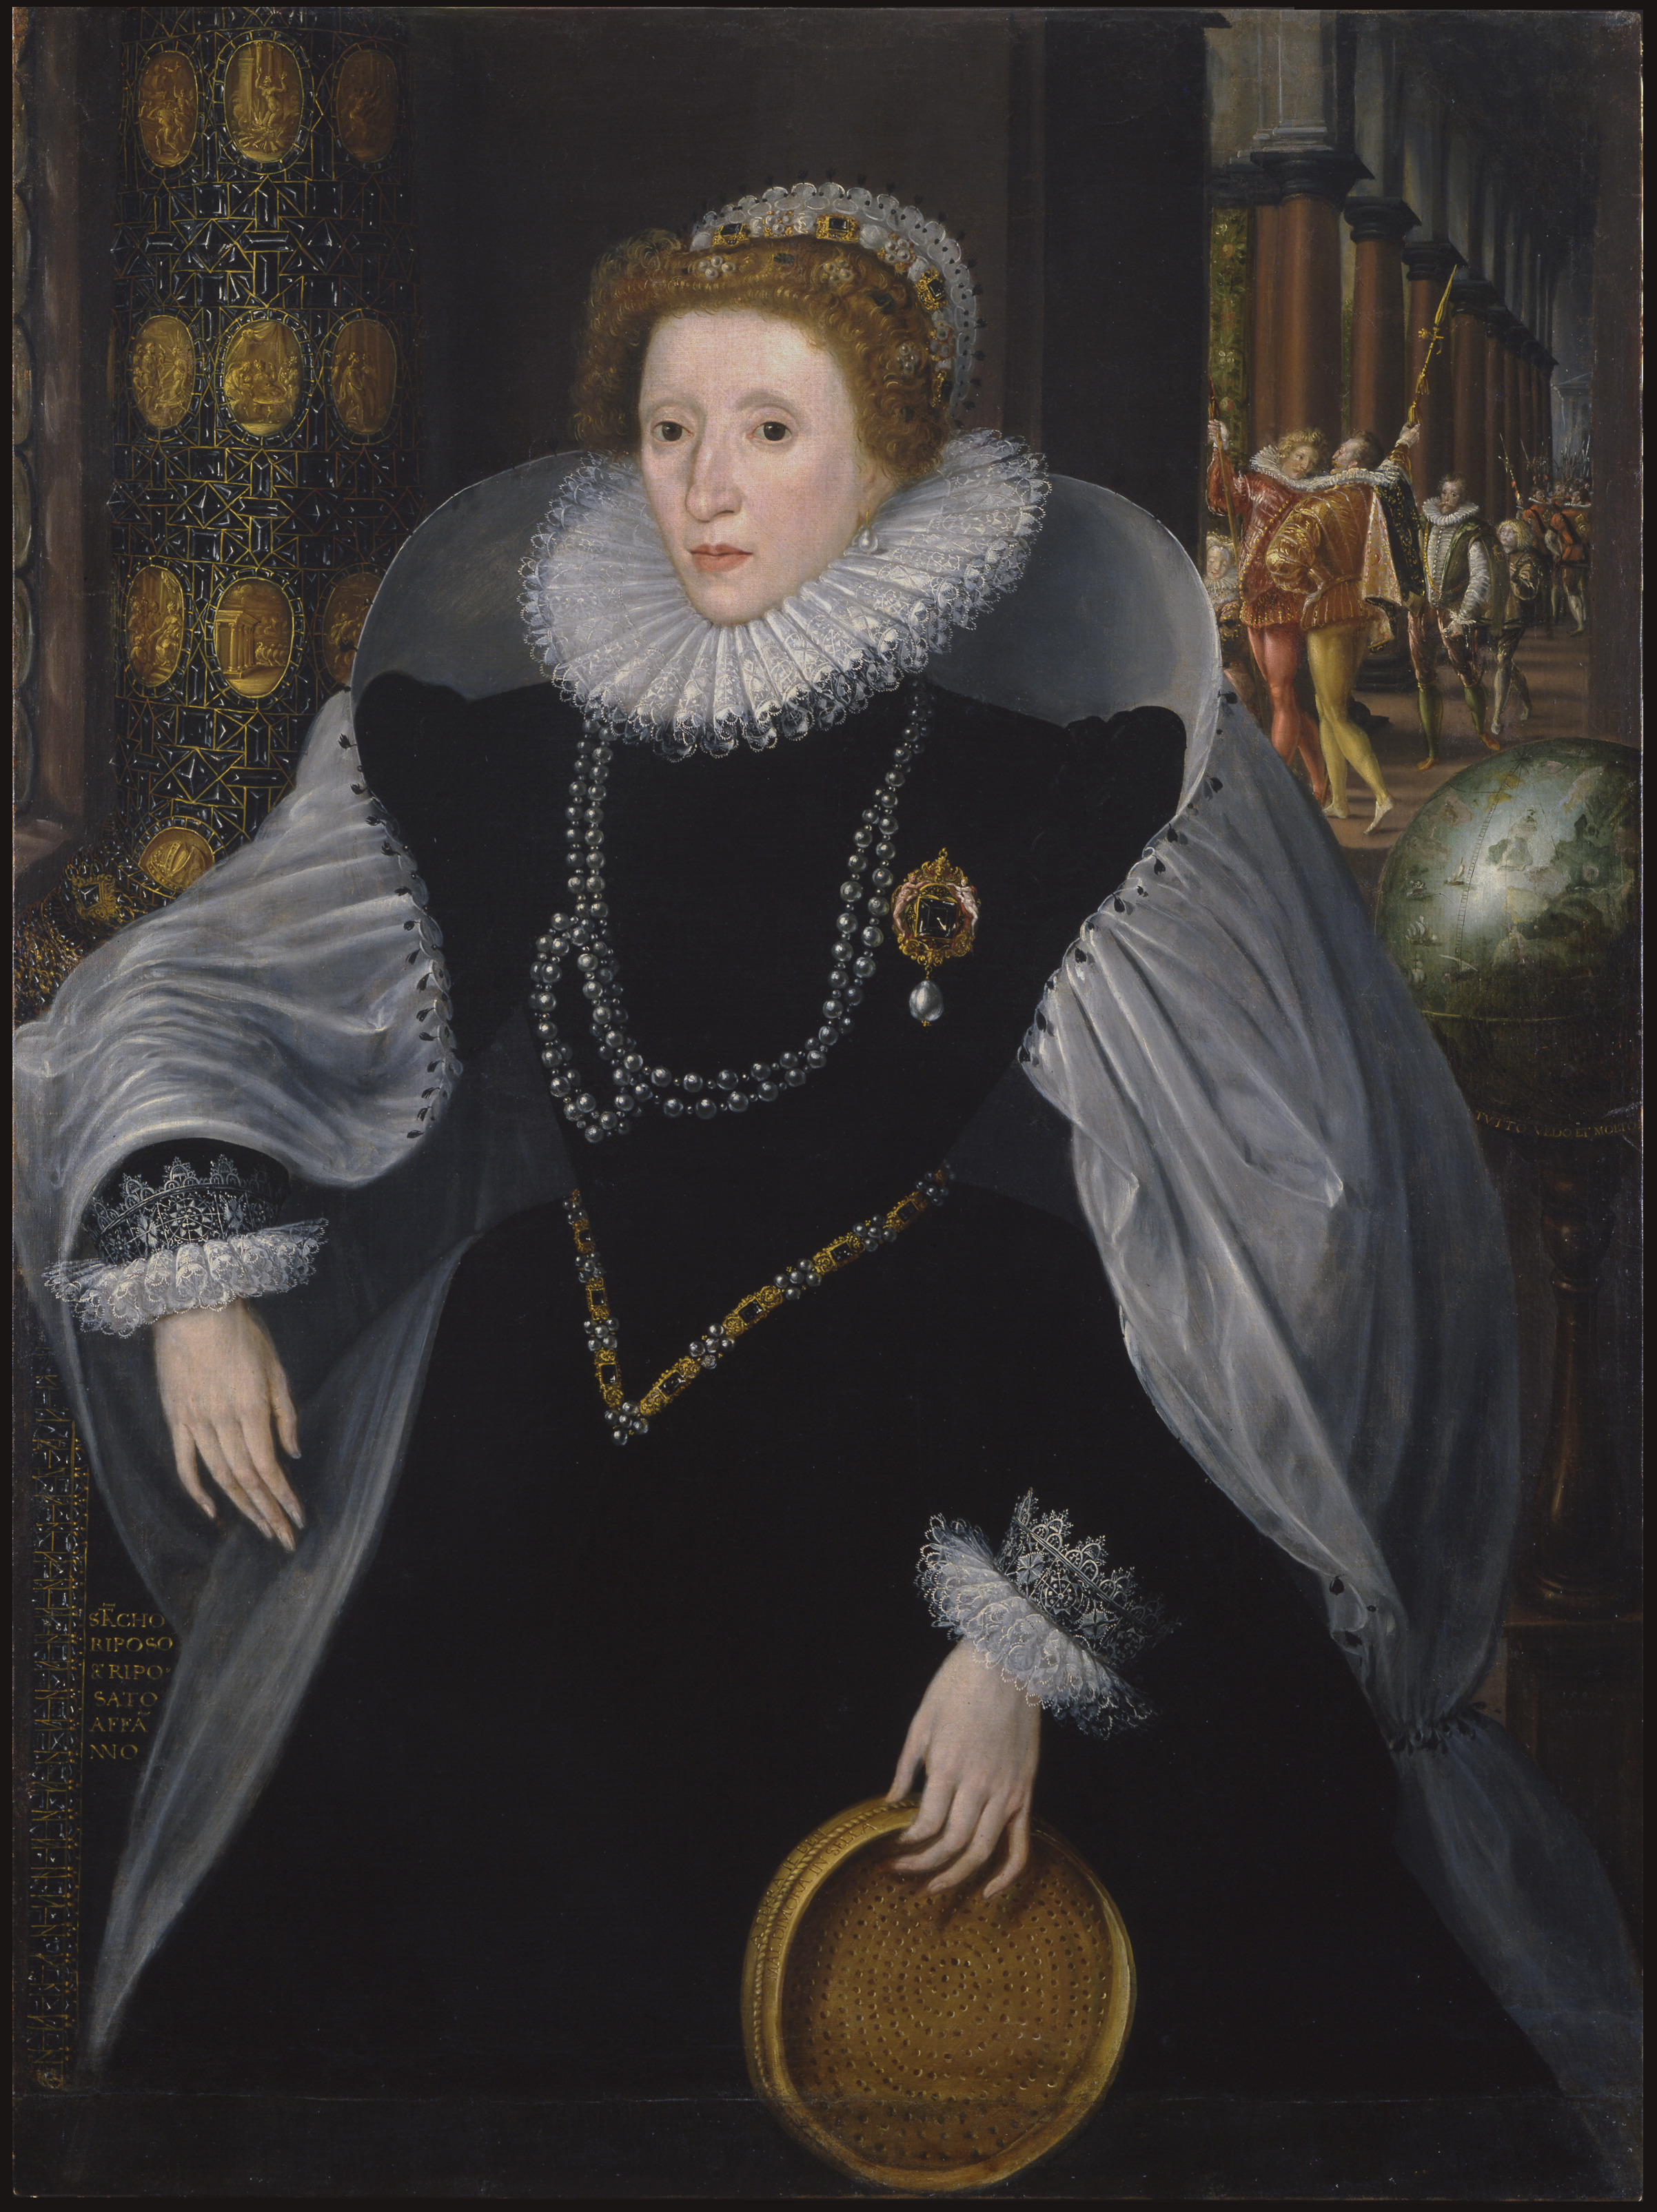 Quentin Metsys the Younger (Netherlandish, 1543–1589), ‘Elizabeth I of England (The Sieve Portrait),’ 1583. Oil on canvas, 49 by 36in. (124.5 by 91.5cm). Pinacoteca Nazionale di Siena. By permission of the Ministry of Cultural Heritage and Activities, Museum Complex of Tuscany (Polo Museale della Toscana) Photo Archive of the National Gallery of Siena (Pinacoteca Nazionale di Siena) 